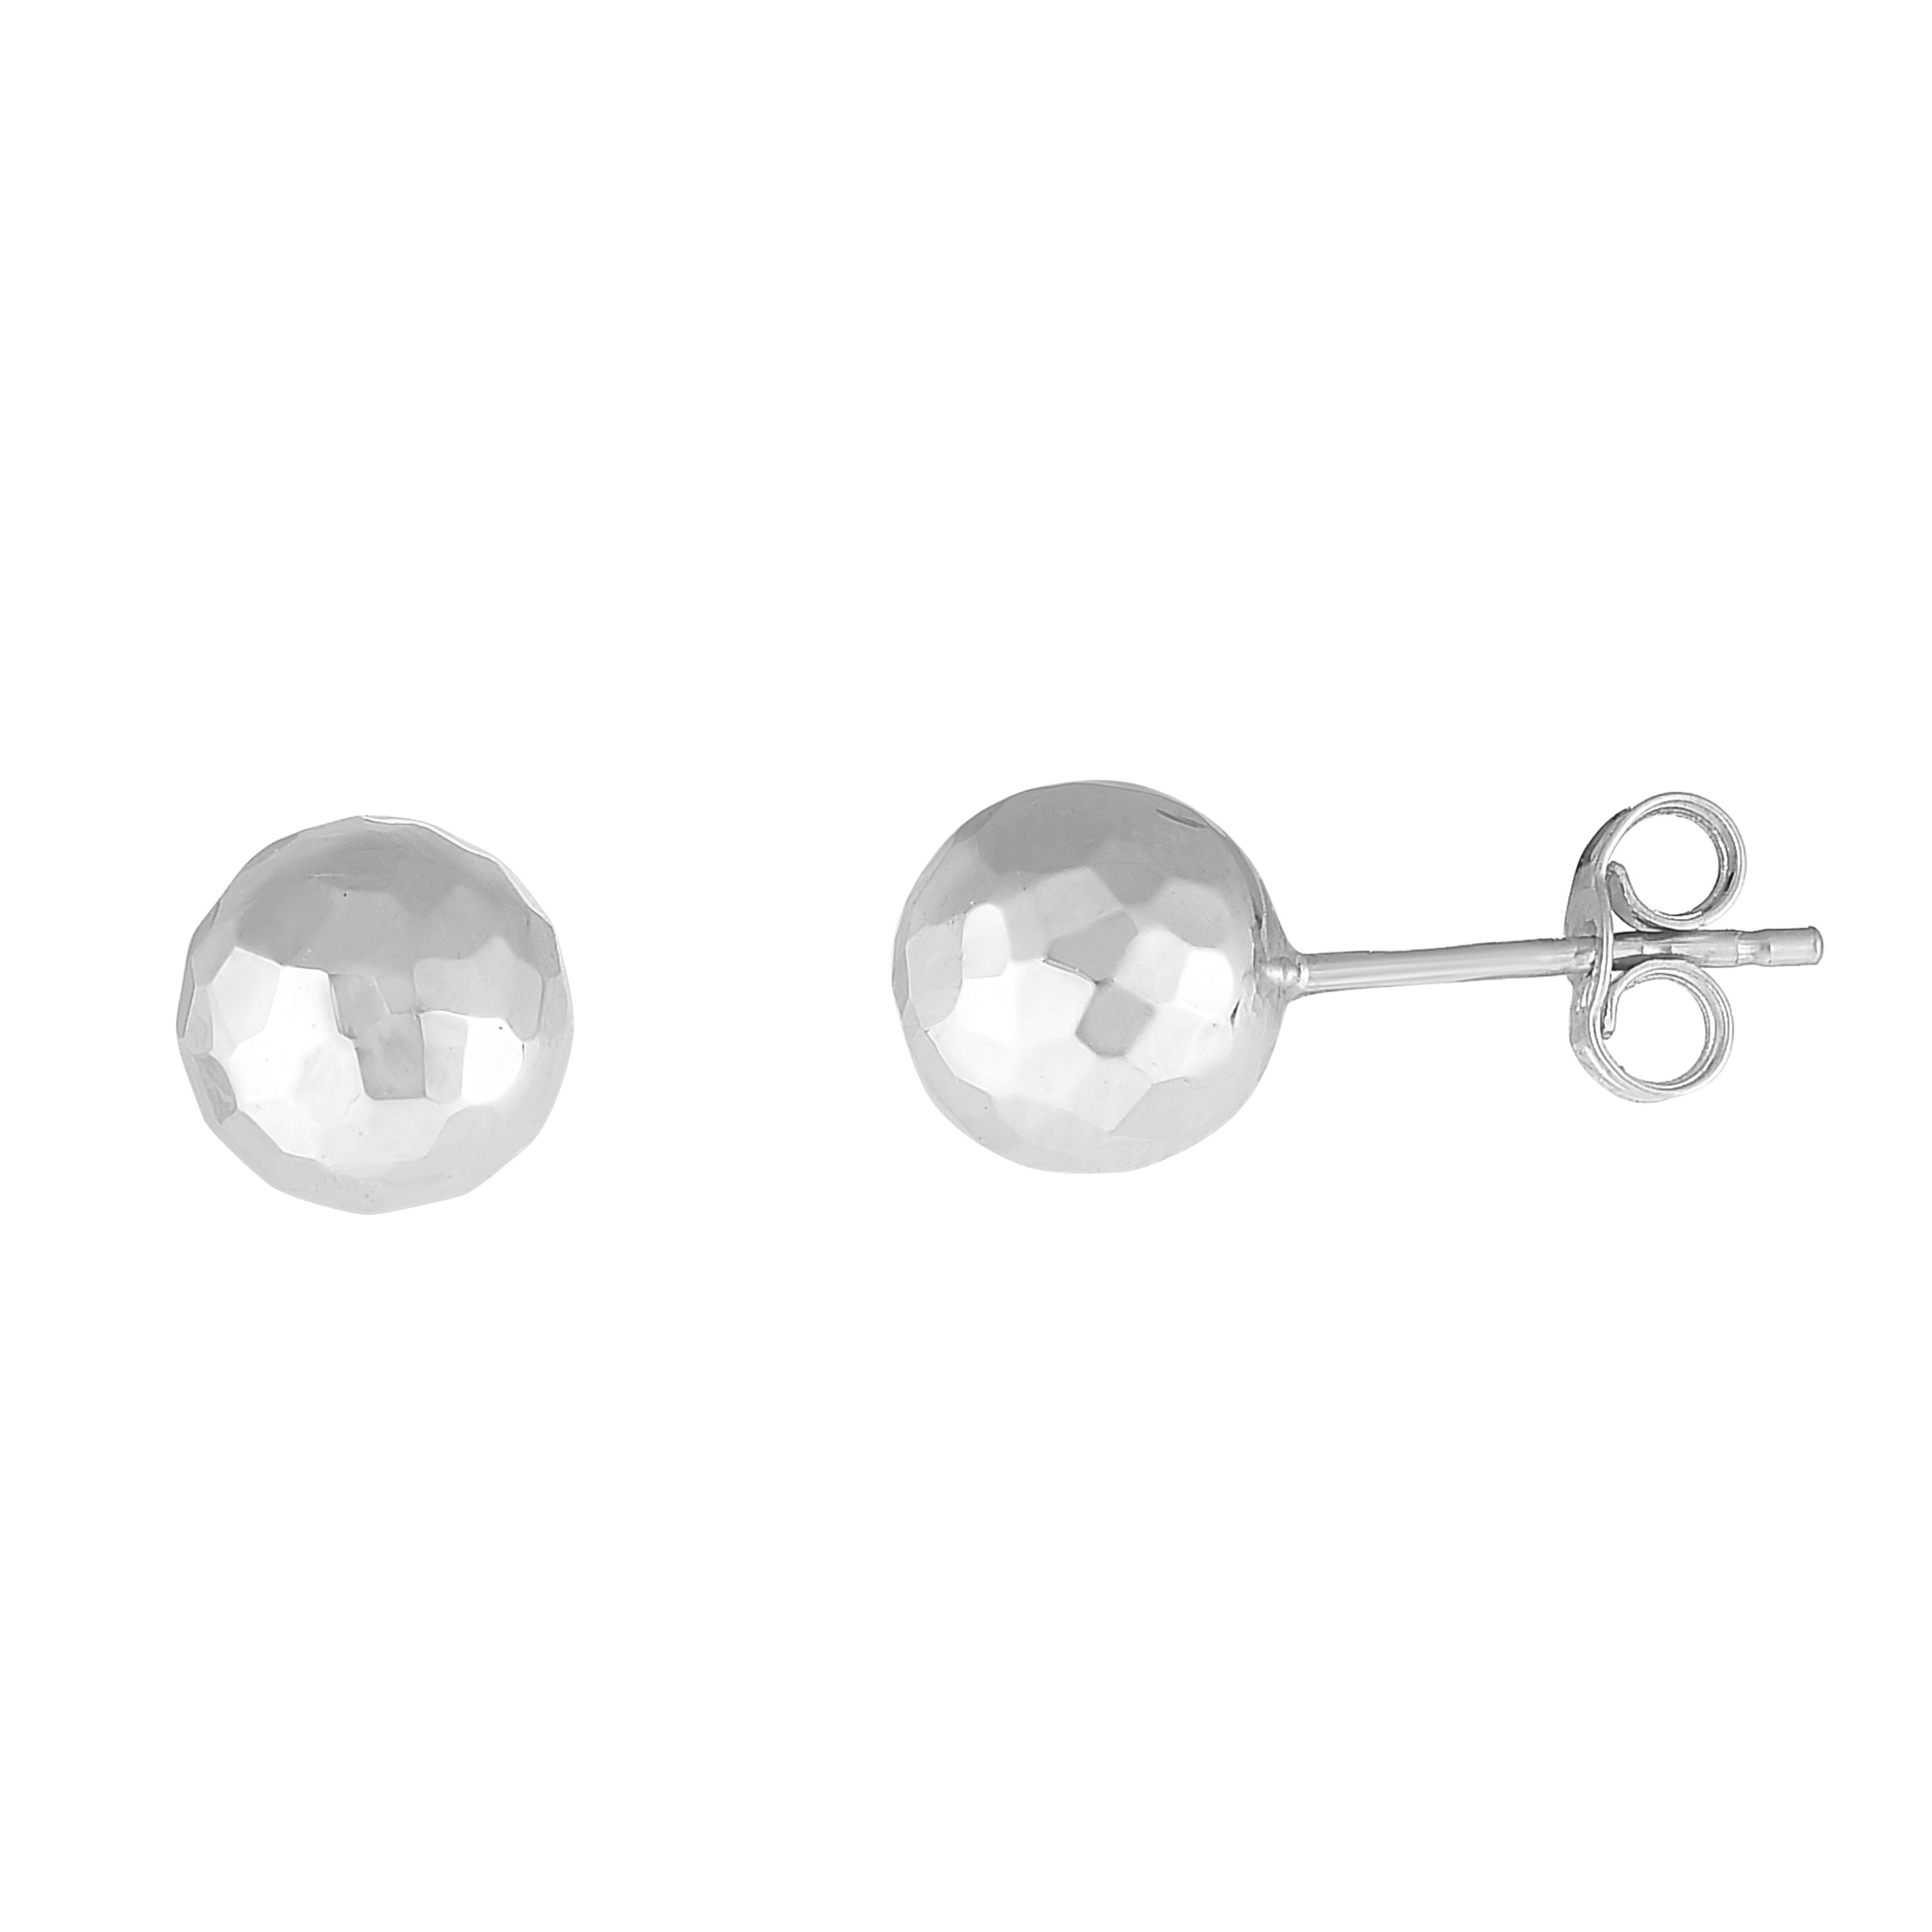 Jewels By Lux 14k White Gold Polished & Diamond-Cut Half Ball Post Earrings 